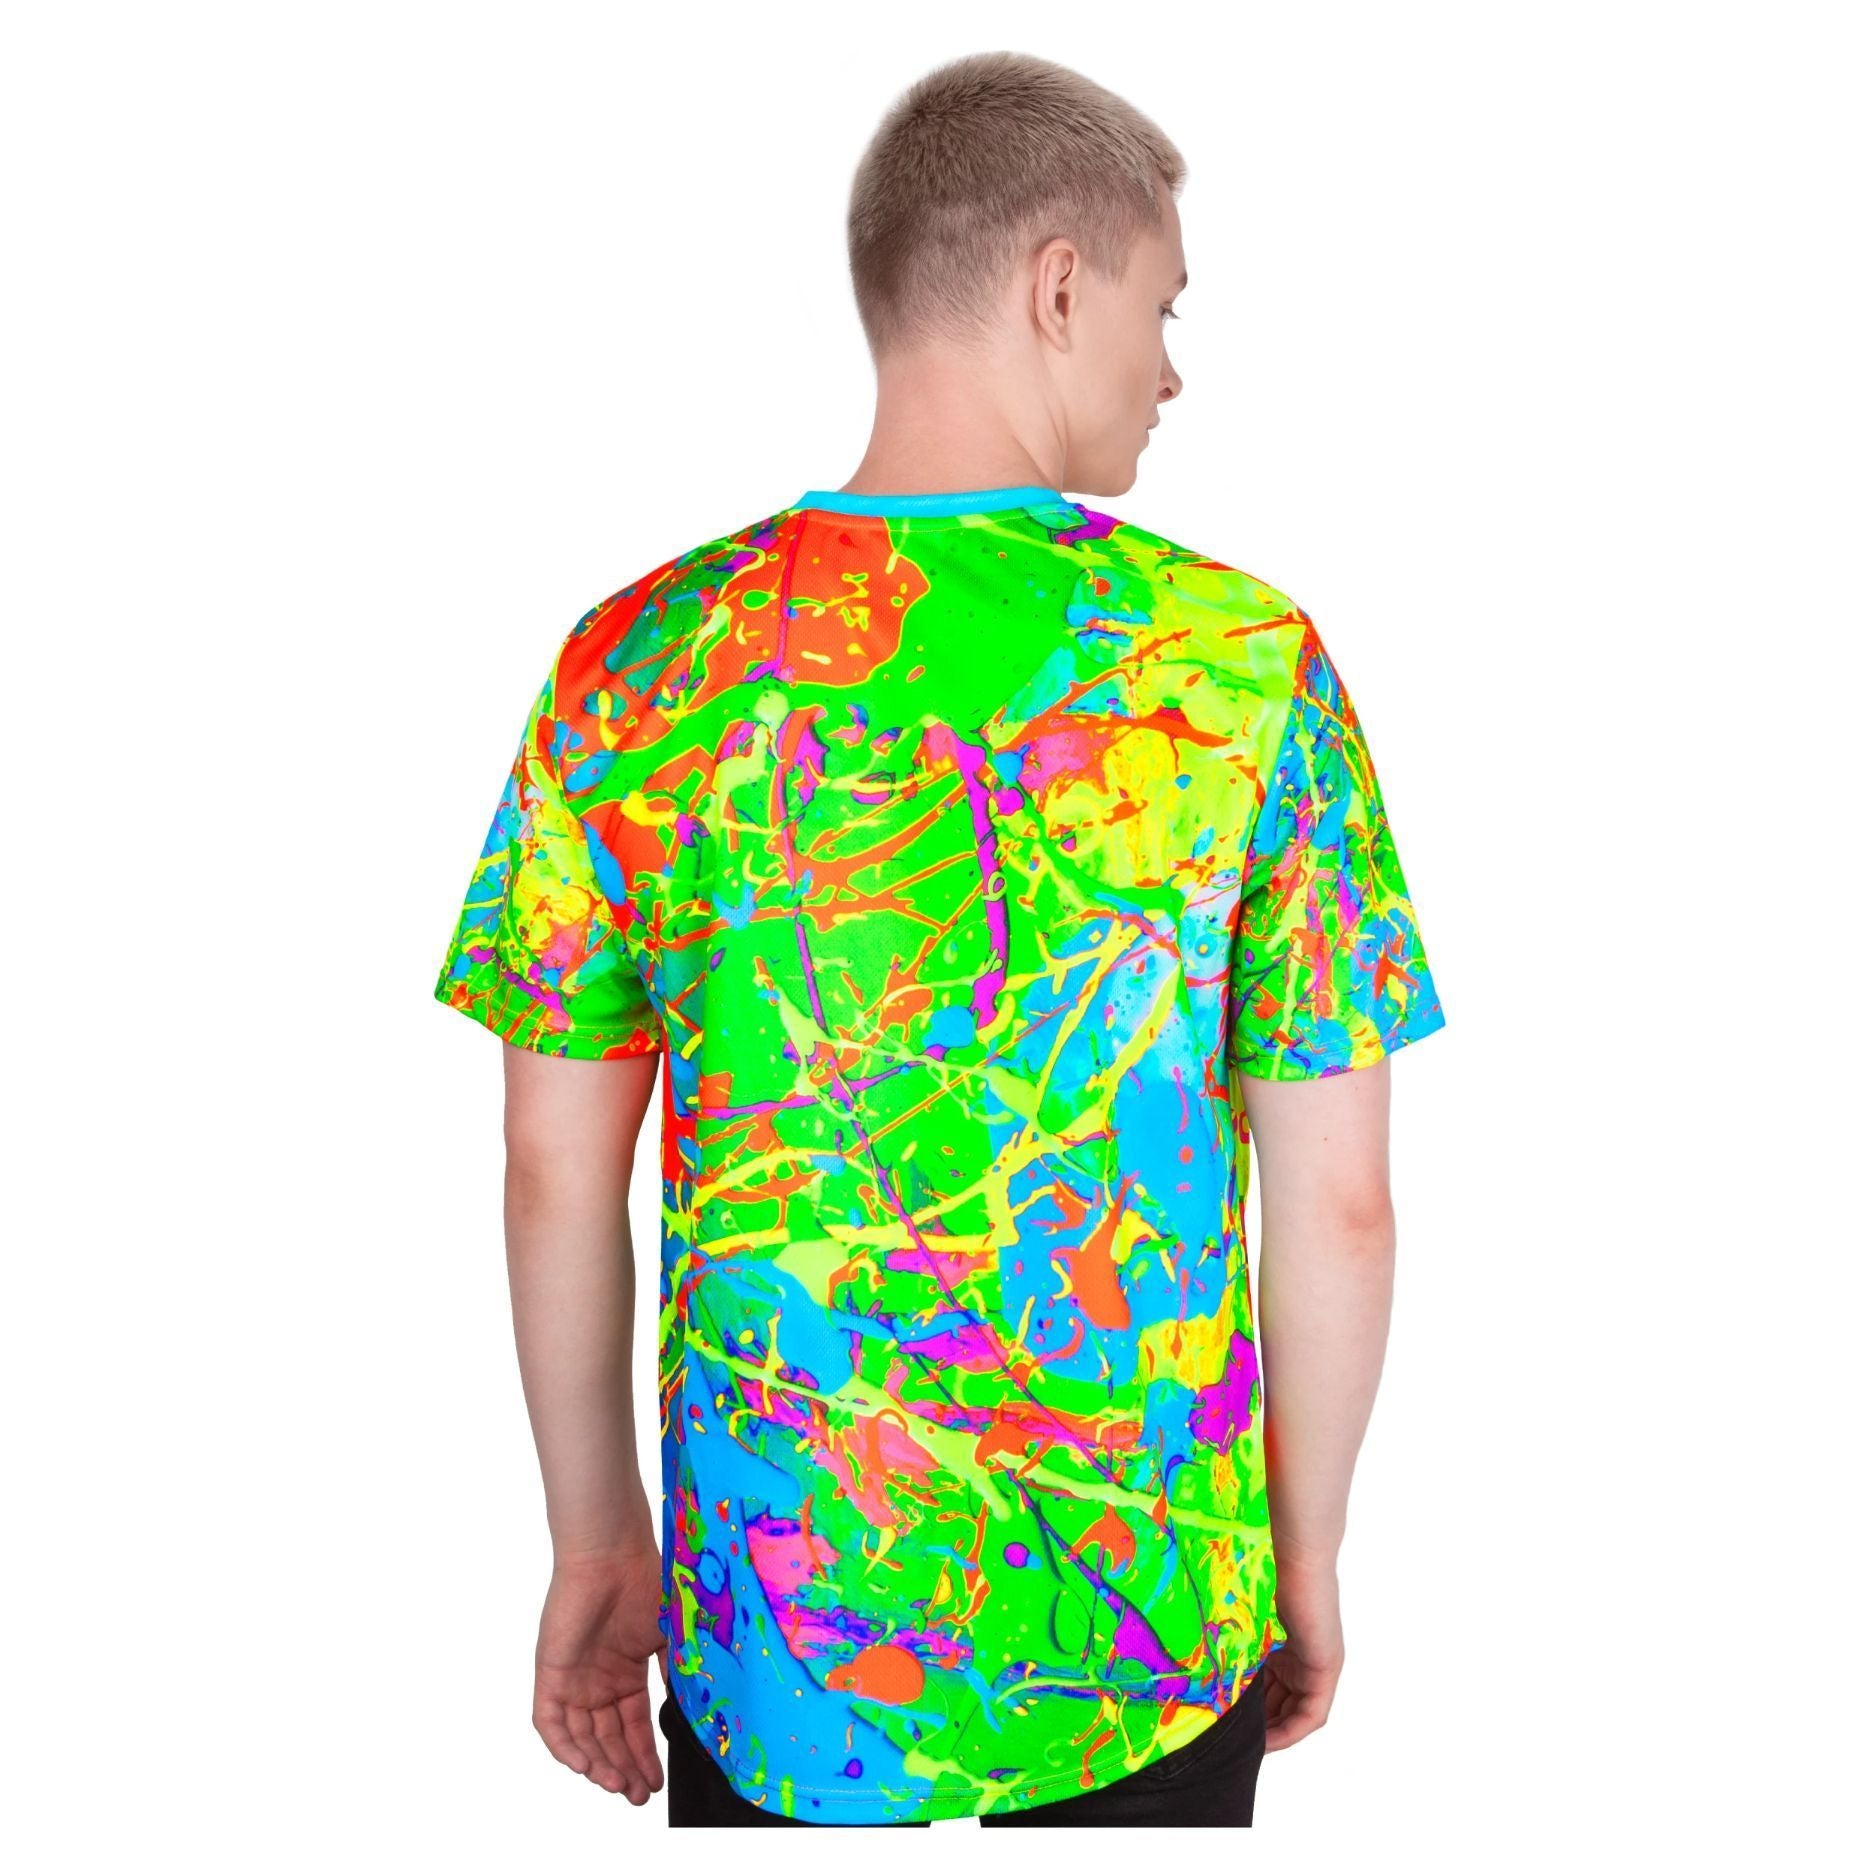 Neon Graphic T-Shirts Glow in UV Fluorescent Blue Lagoon ts32